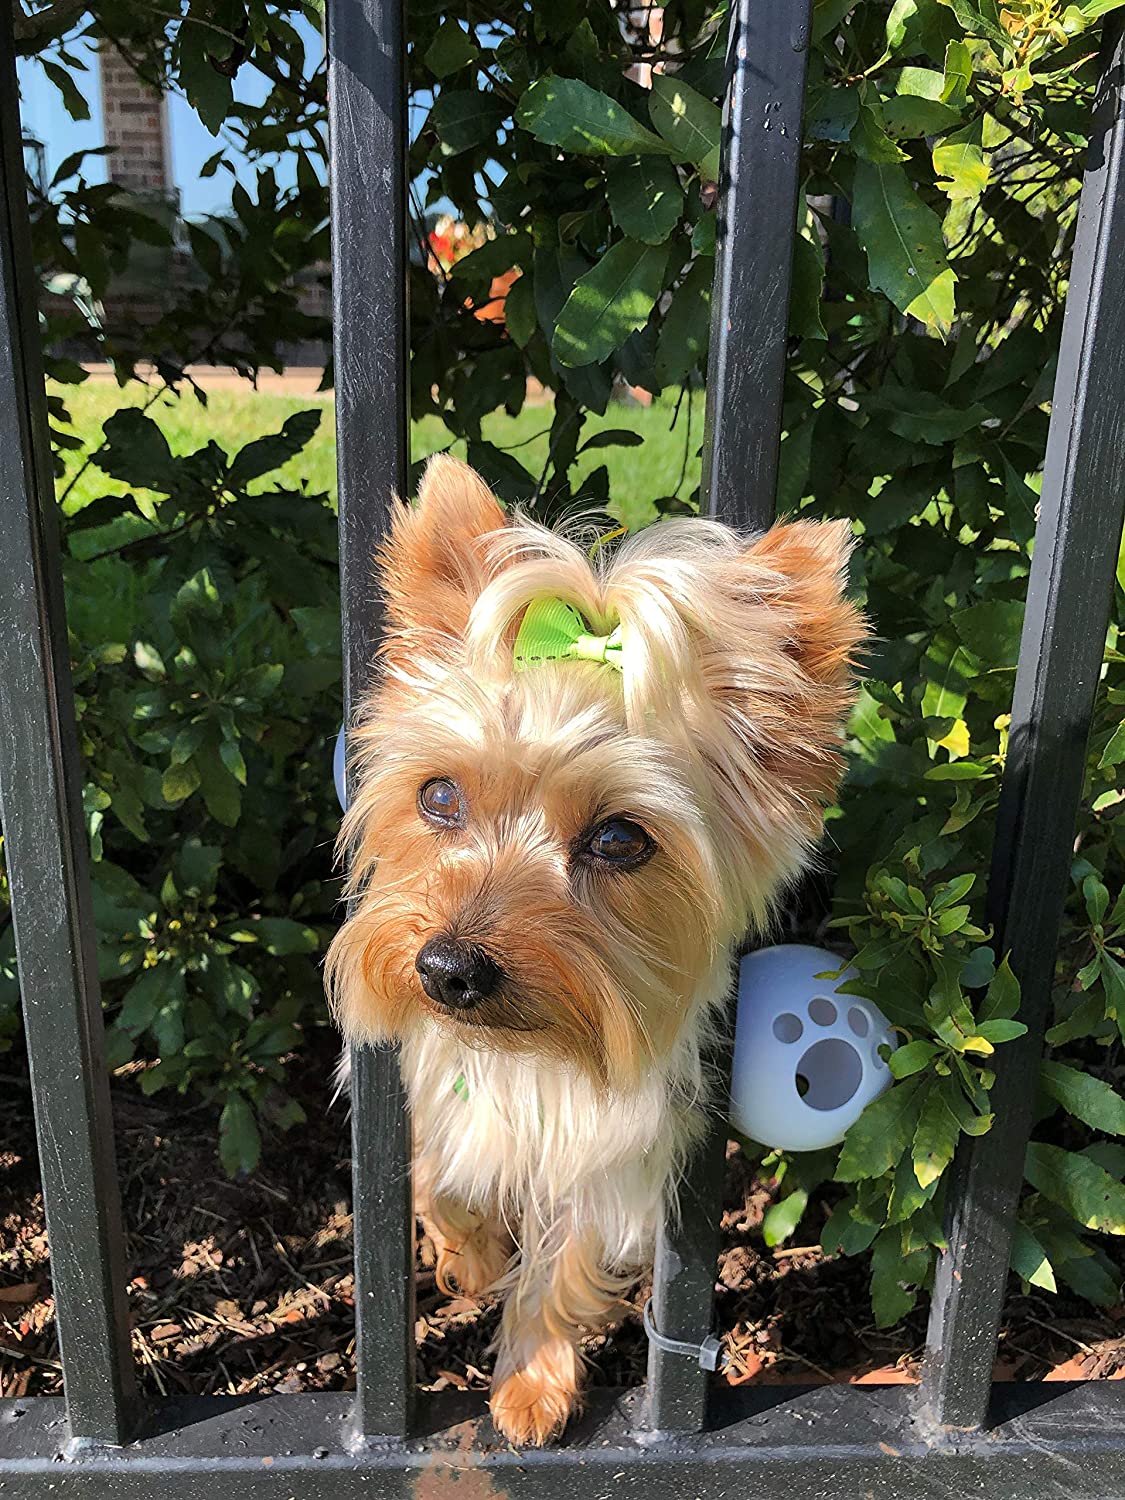 Small Dog Wearing the FenceMate Escape Prevention Dog Harness Trying To escape from fence